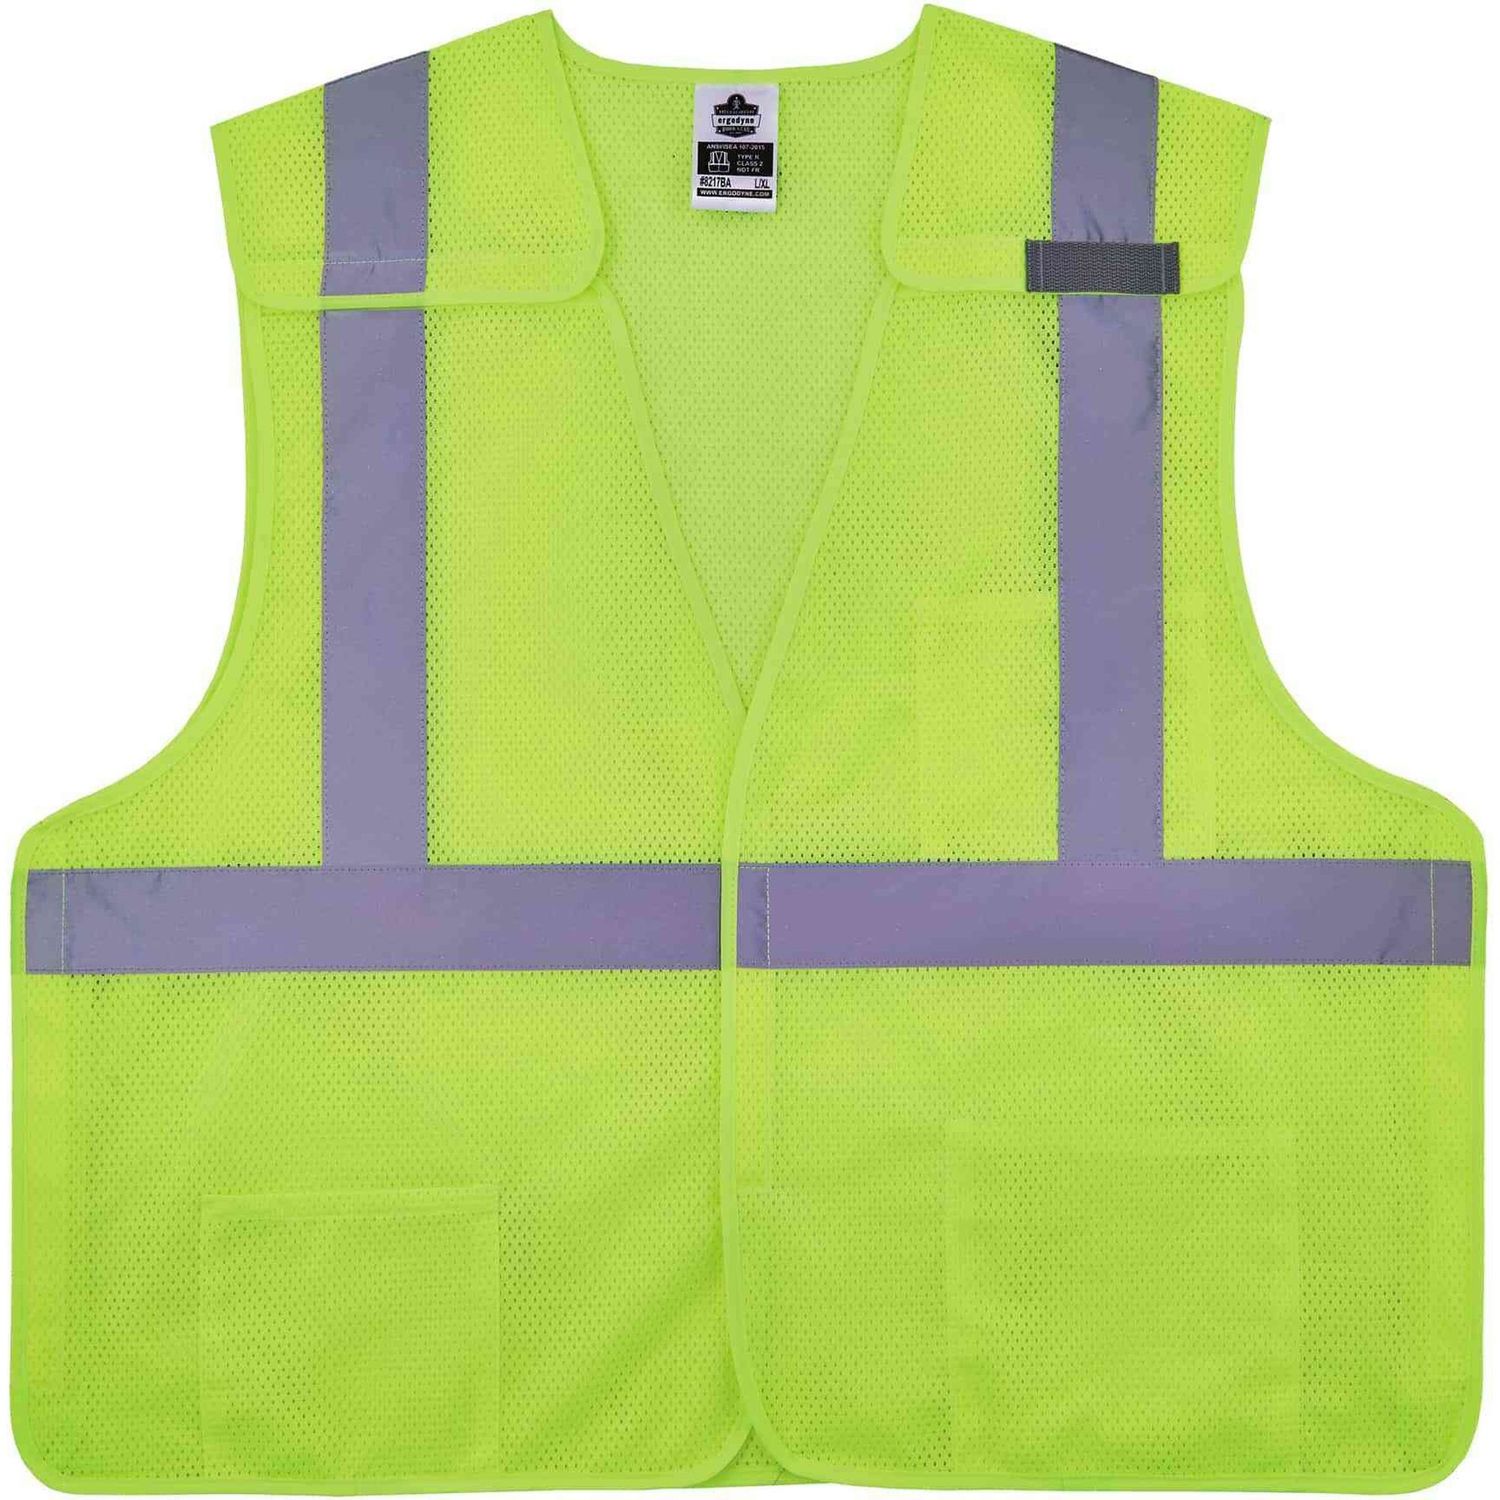 8217BA Breakaway Hi-Vis Class 2 Vest Recommended for: Accessories, Flagger, Airport, Baggage Handling, Forestry, Utility, Parking Attendant, Shipyard